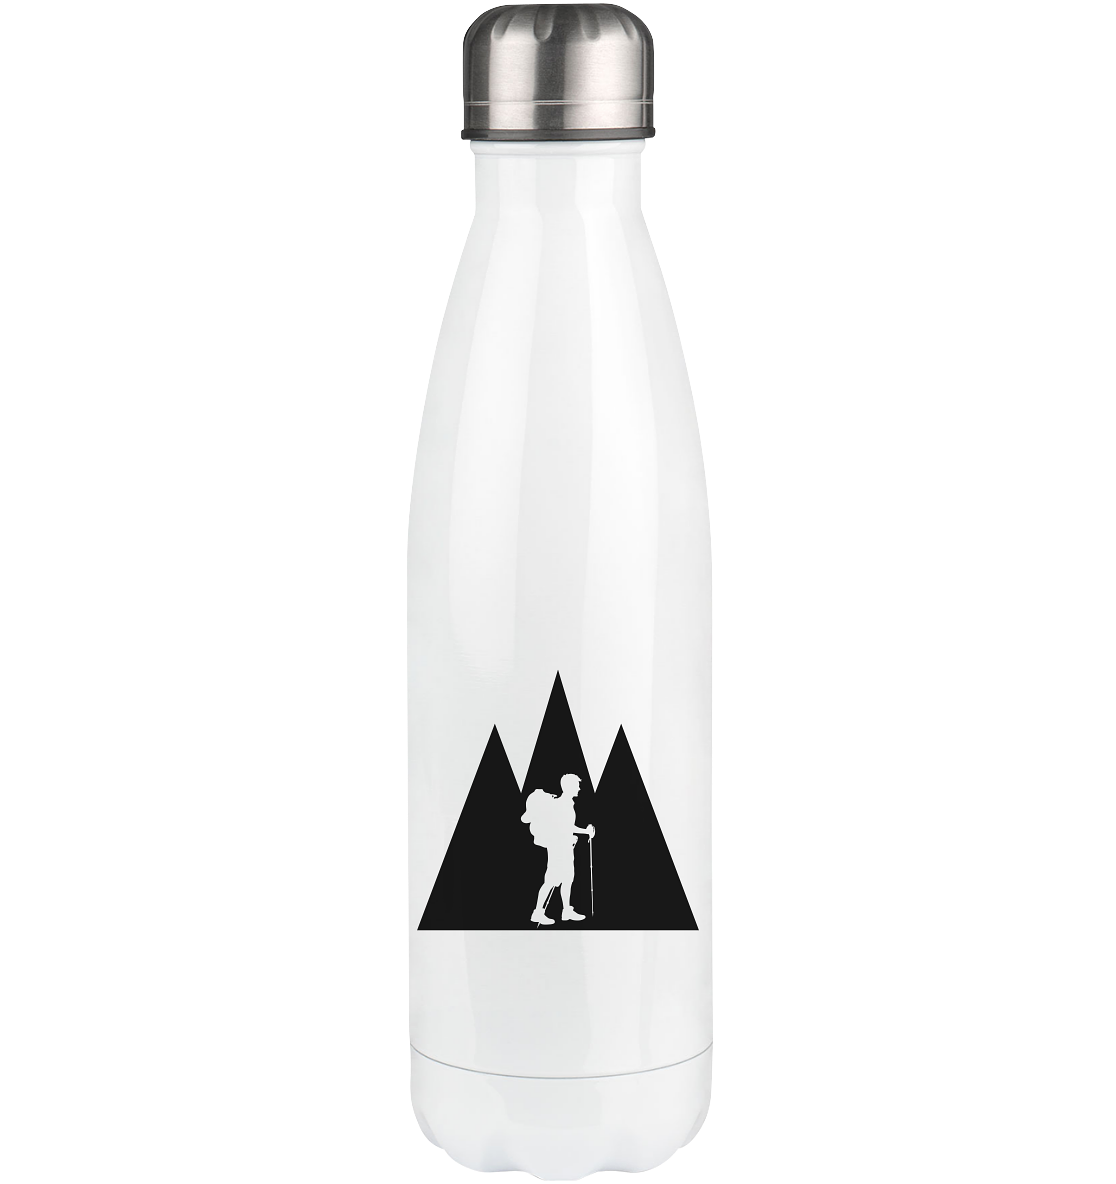 Triangle Mountain and Hiking - Edelstahl Thermosflasche wandern 500ml